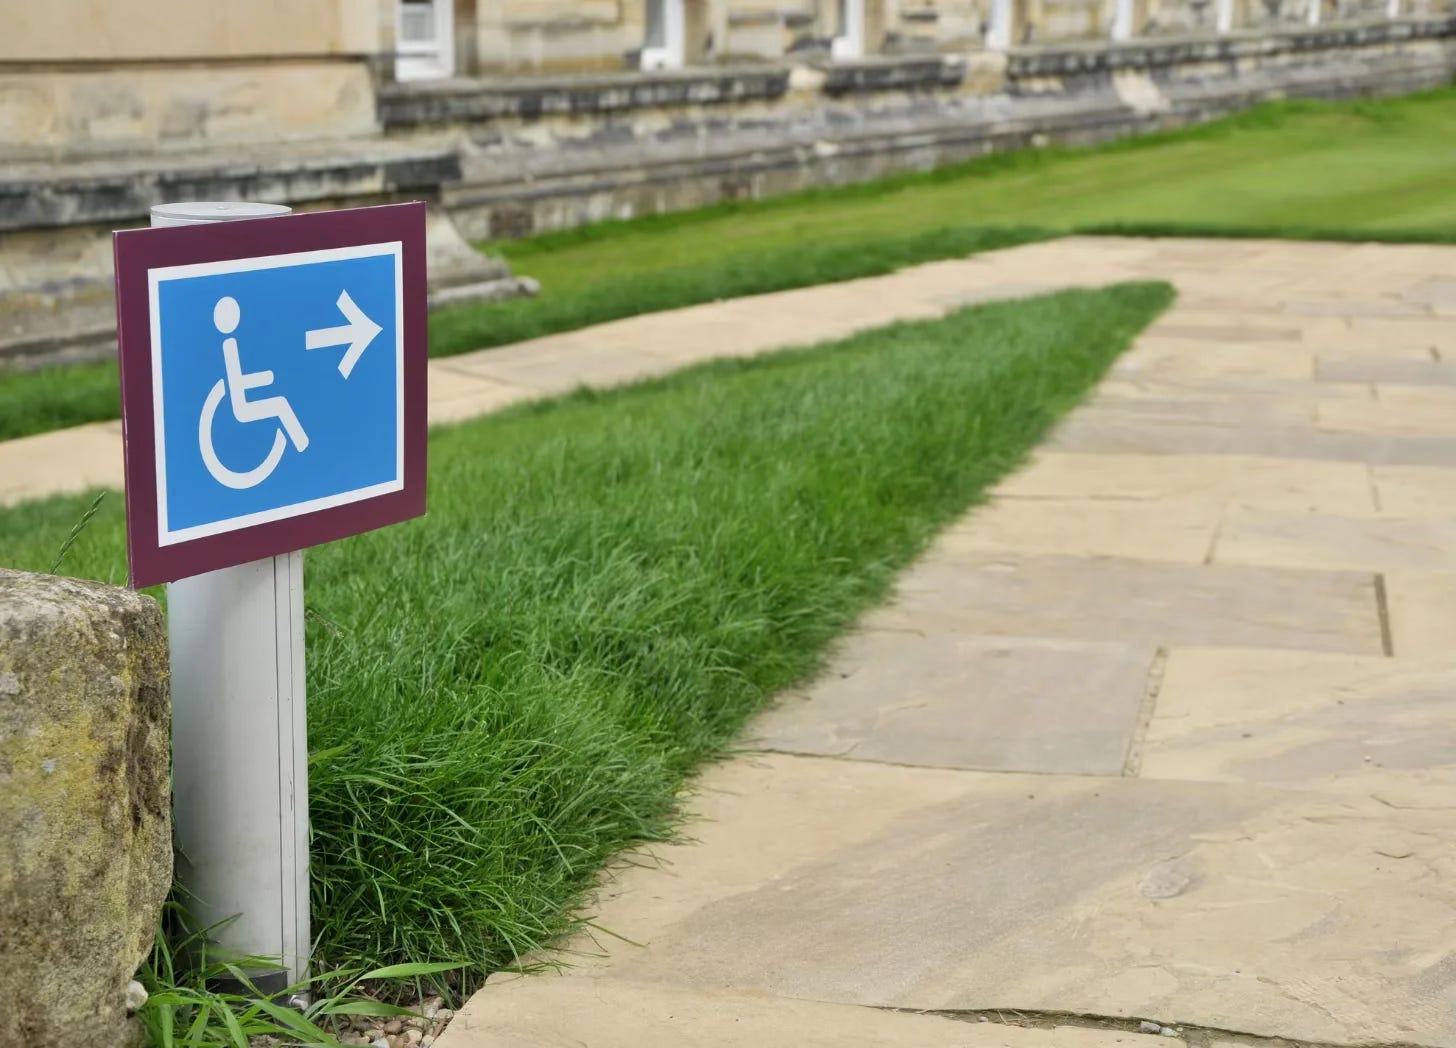 Wheelchair symbol sign marking an accessible path